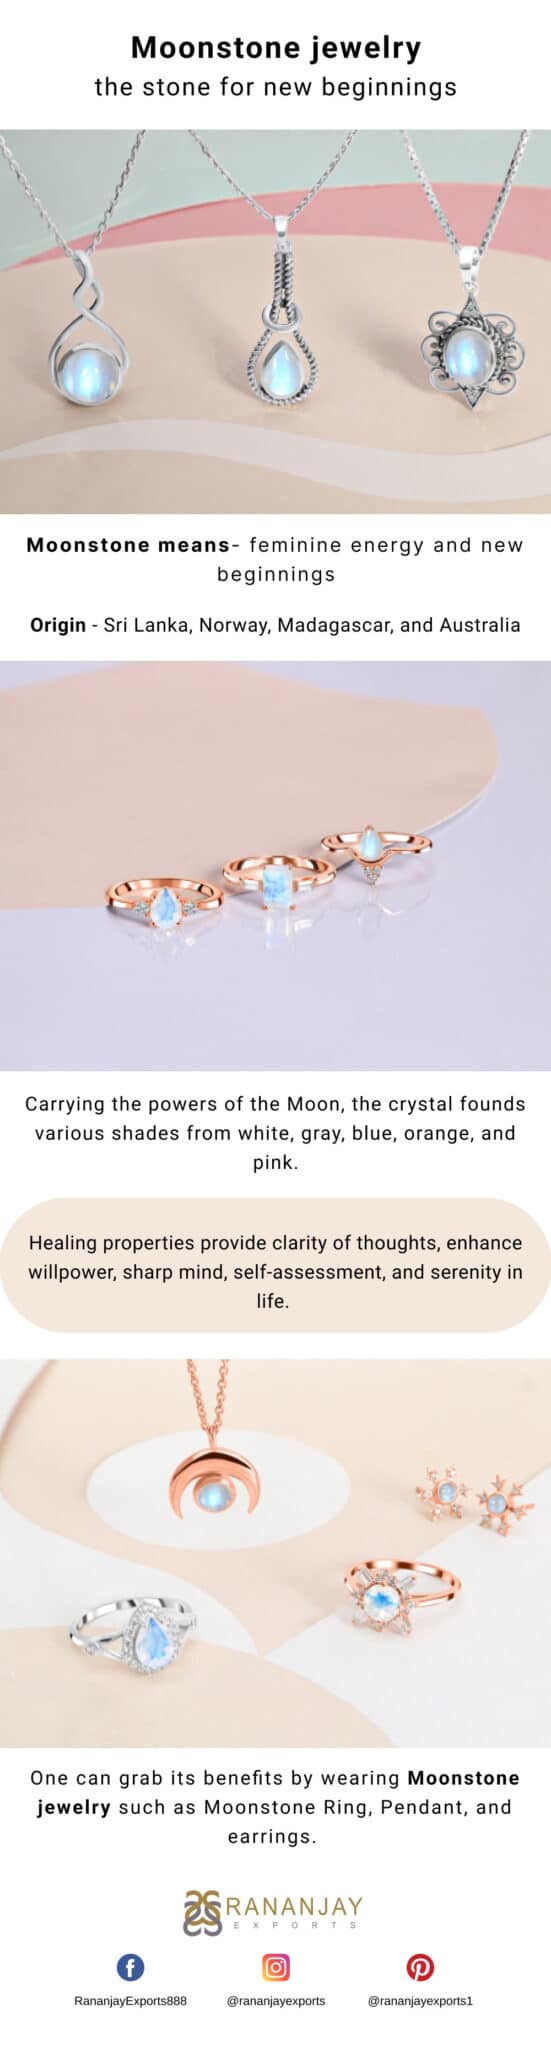 Moonstone jewelry- the stone for new beginnings-c1a48e77